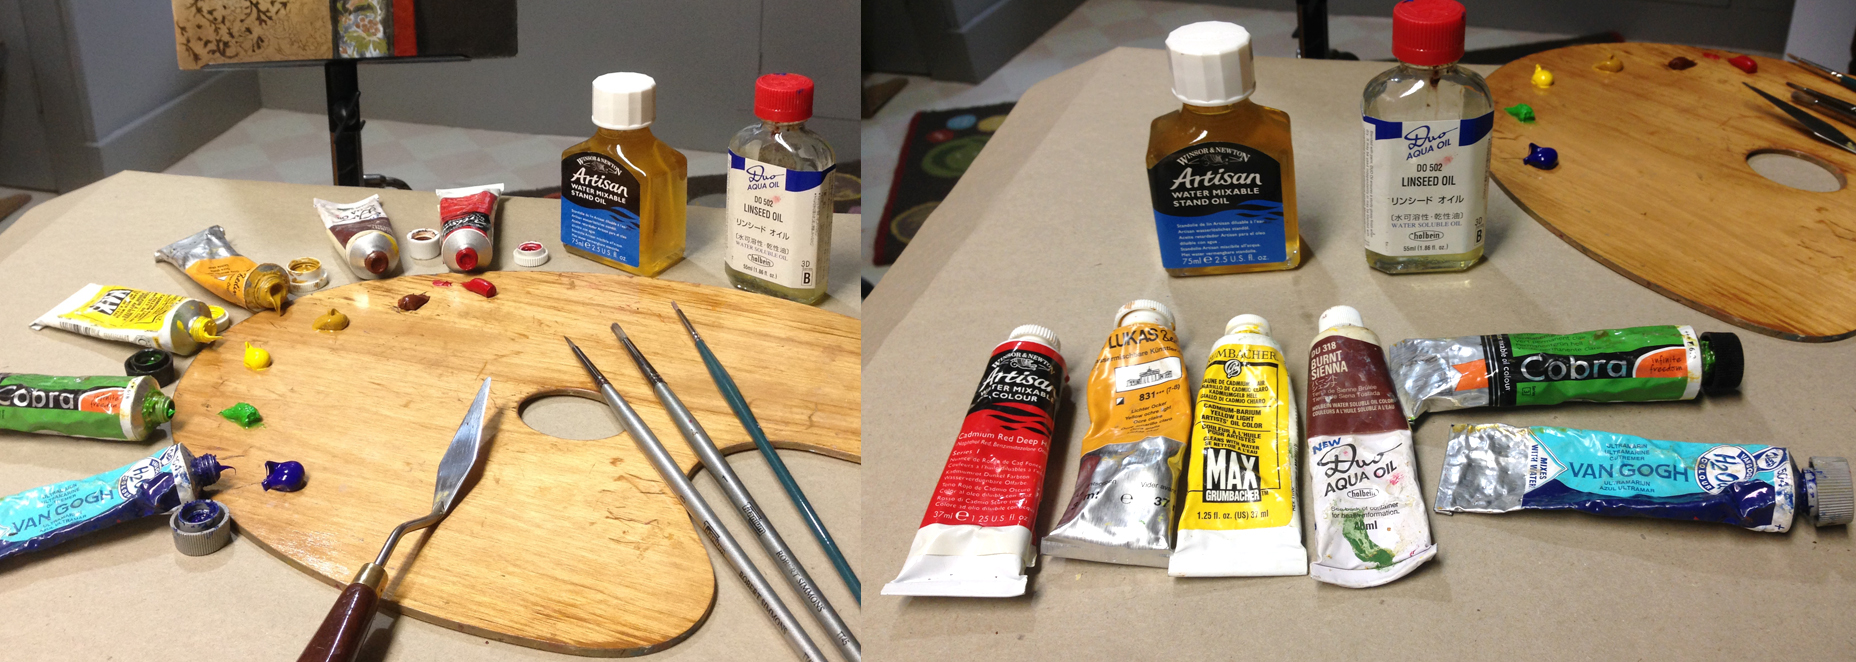 Get Started With Oil Painting Using Water-Soluble Paints